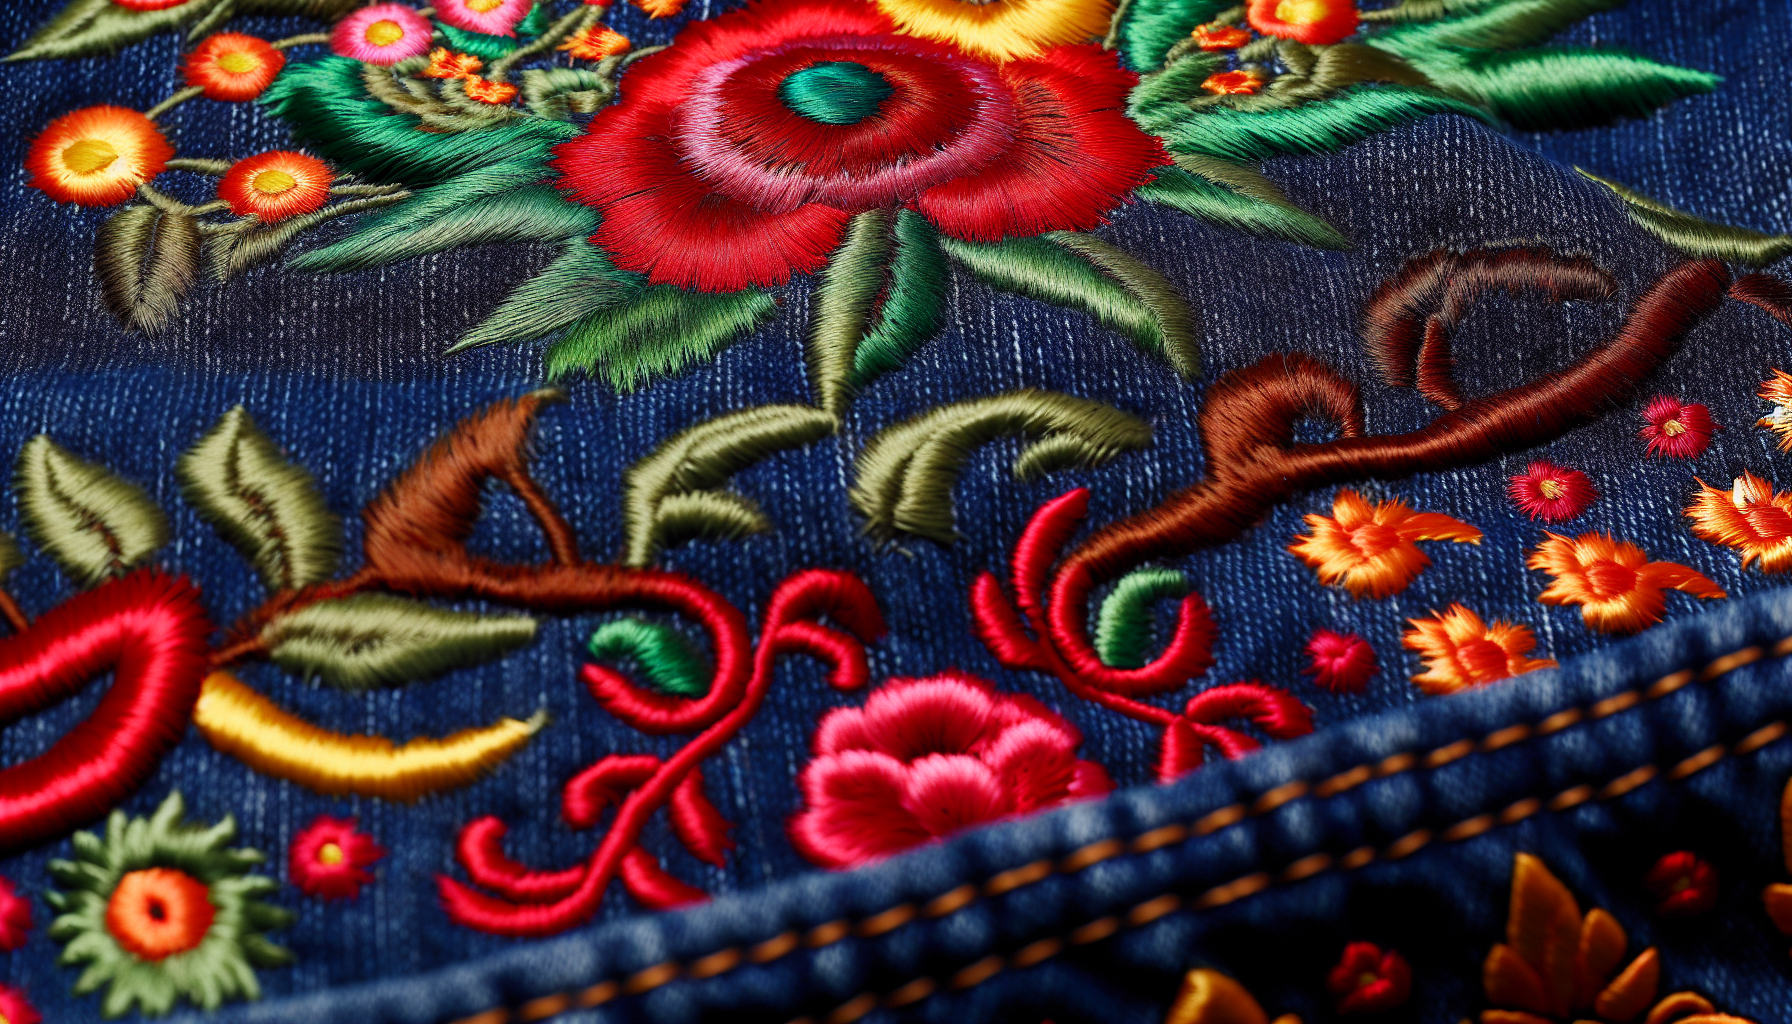 Embroidered floral pattern on a stylish denim jacket